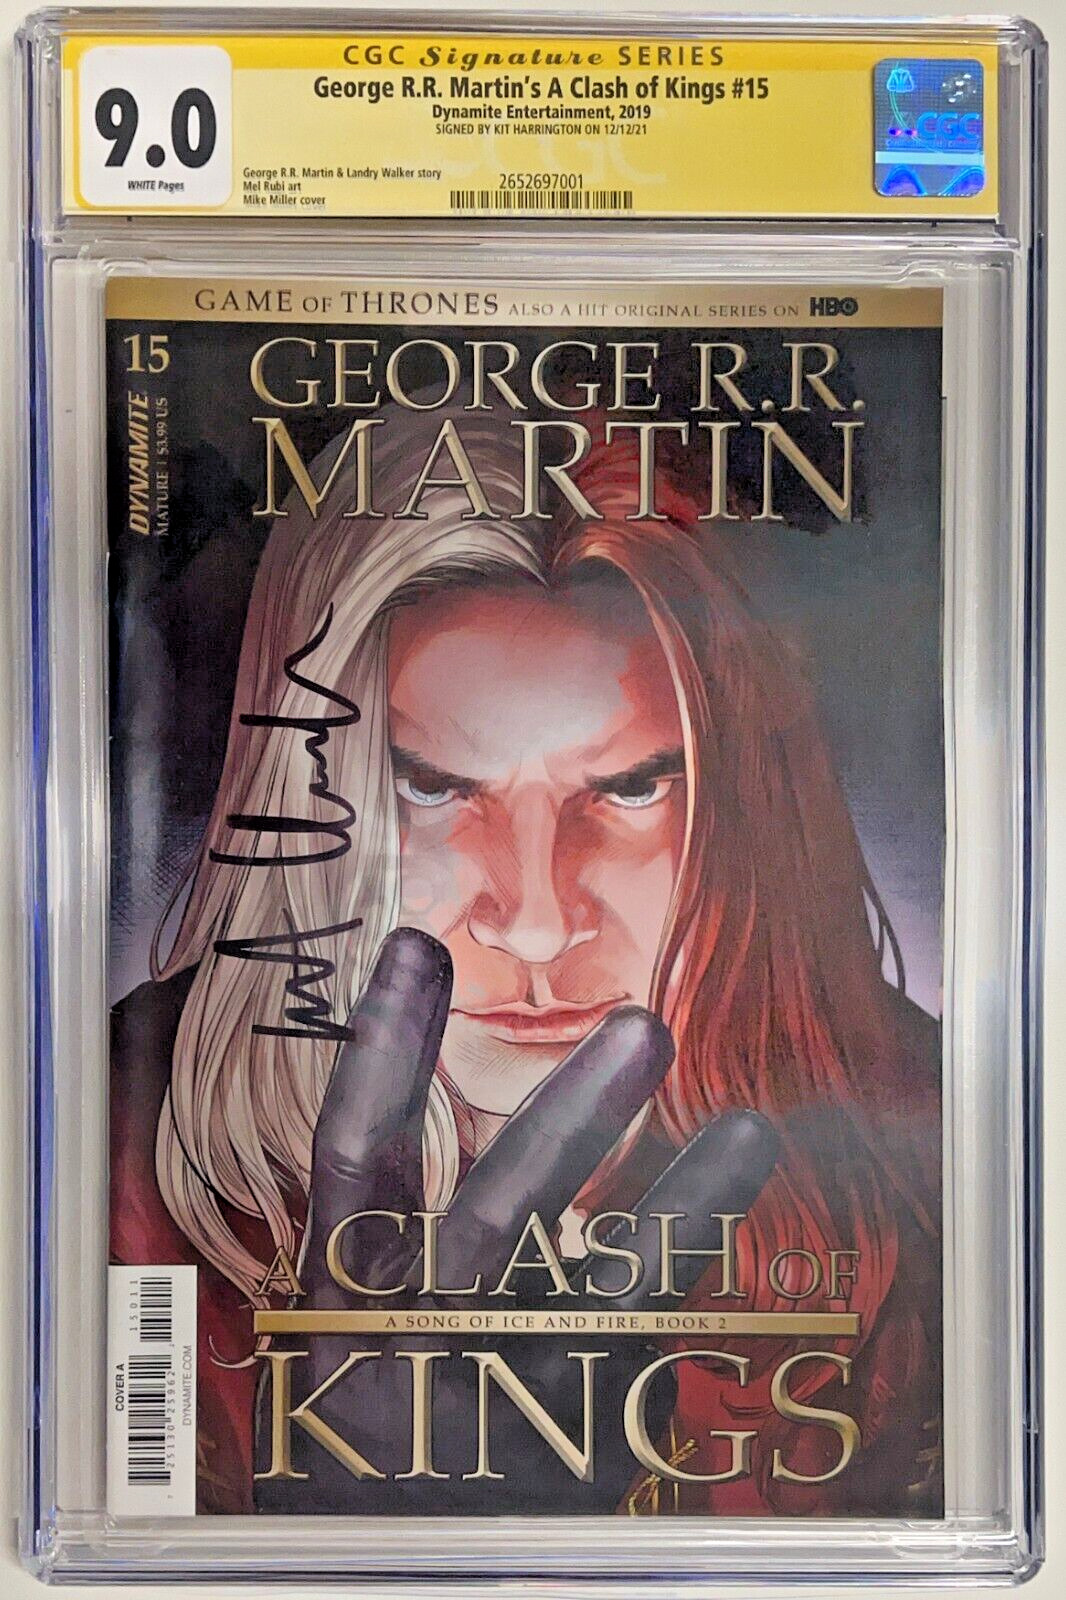 CGC SS Graded 9.0 George R.R. Martin Clash of Kings #15 Signed by Kit Harington